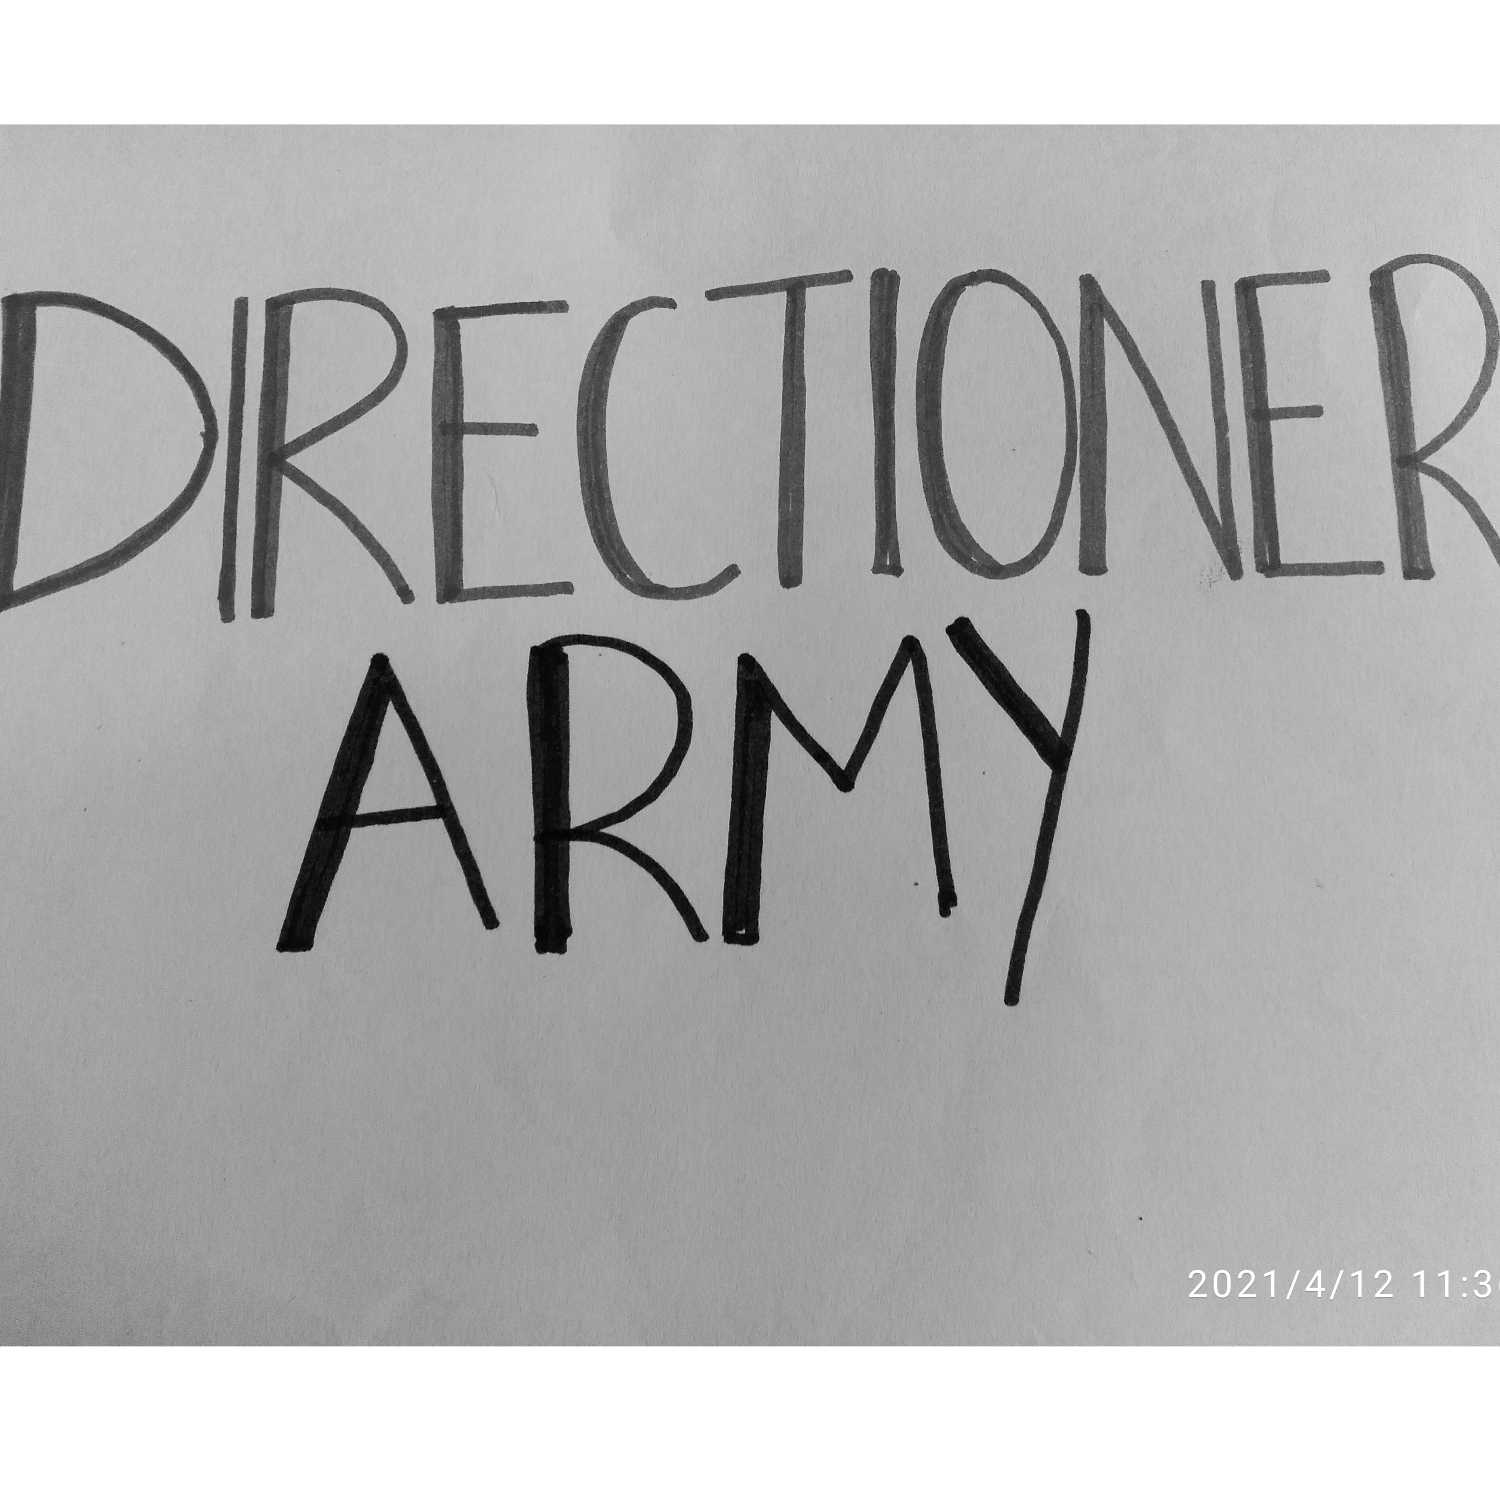 Directioner Army